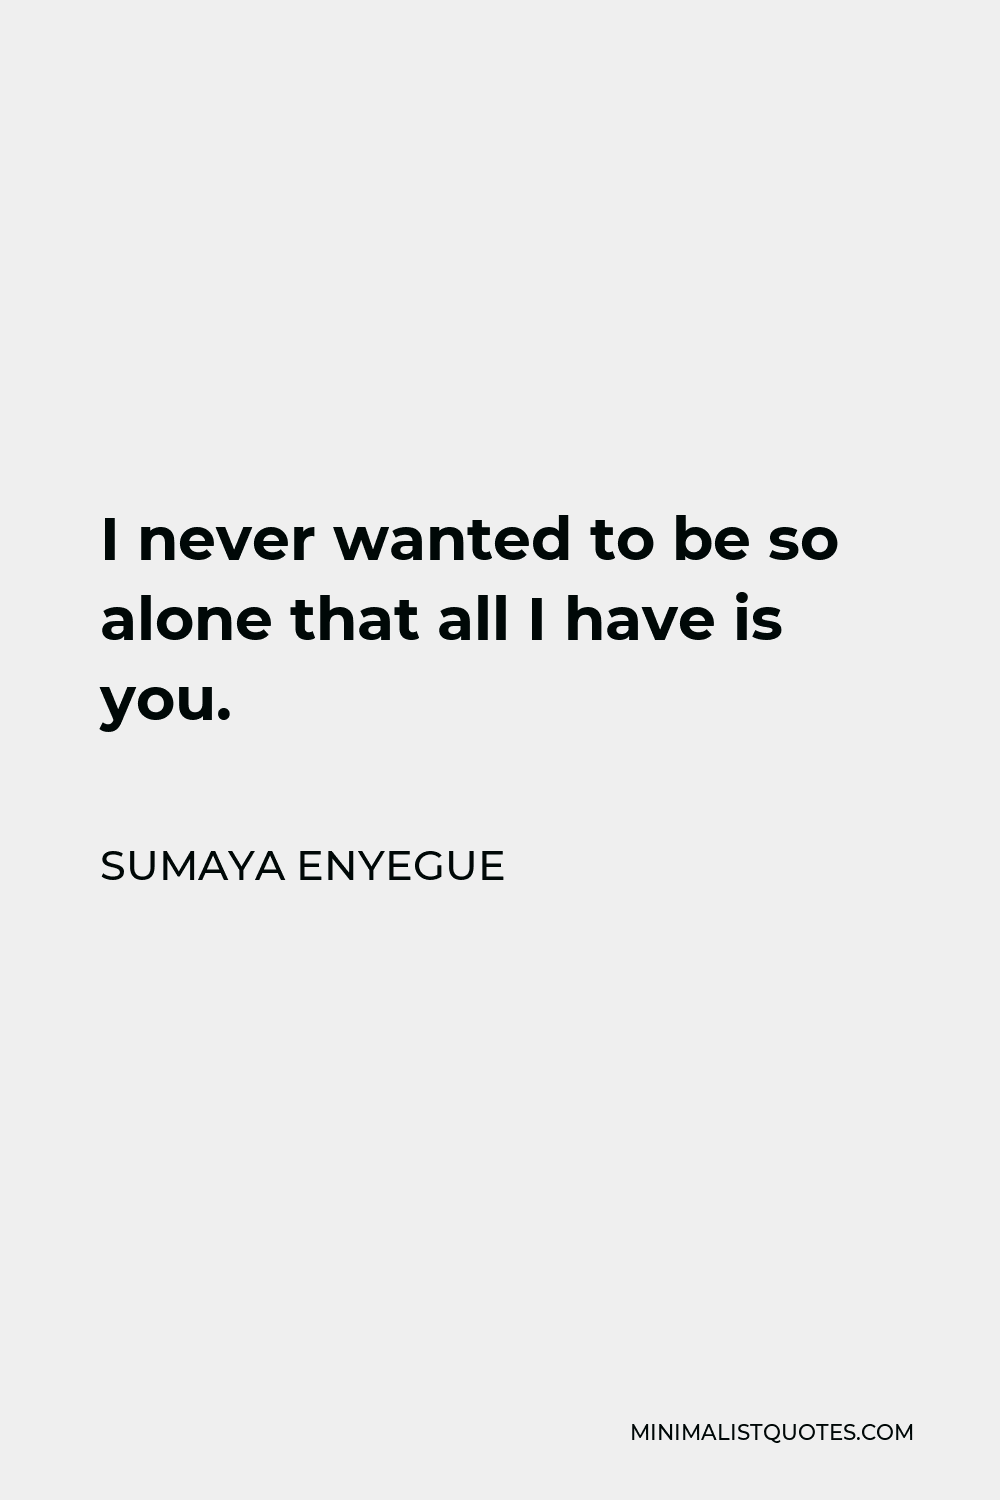 Sumaya Enyegue Quote - I never wanted to be so alone that all I have is you.